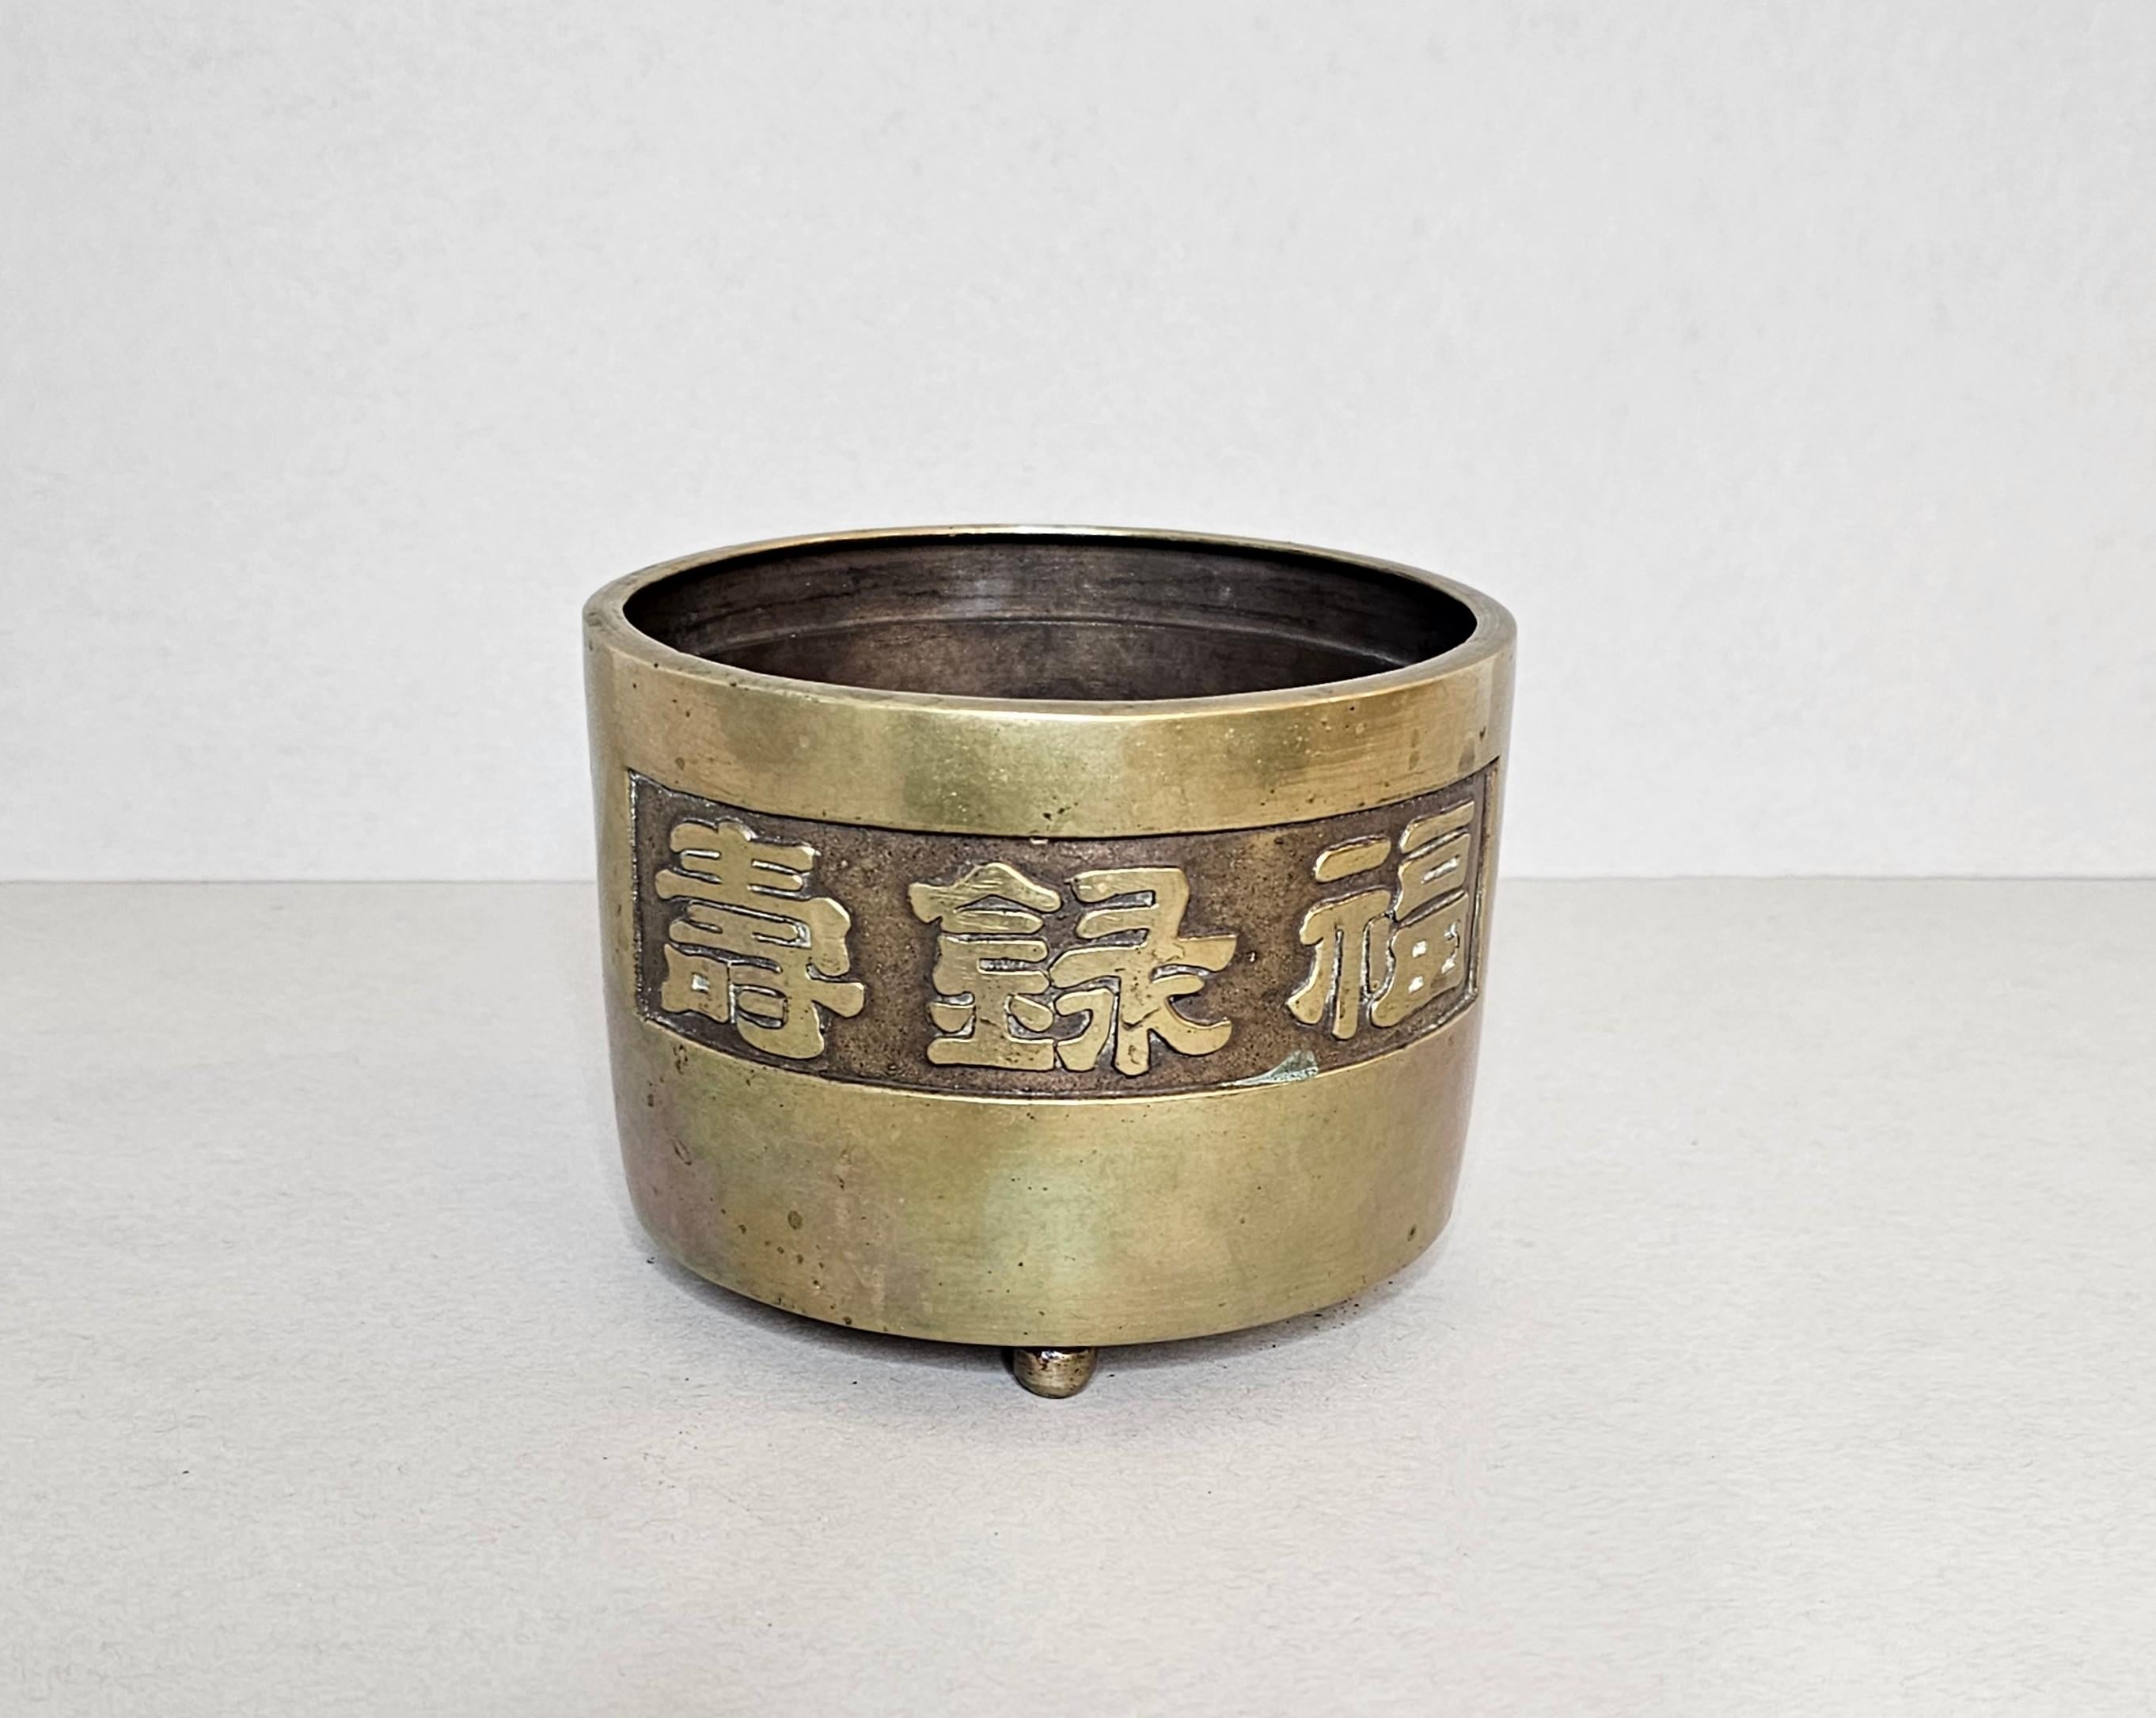 A high quality Qing Dynasty (1636-1912) Chinese bronze brazier censer (today use as an incense burner - cachepot planter - decorative table box) encircled with traditional characters, rising on three ball feet, nicely patinated. Functional and